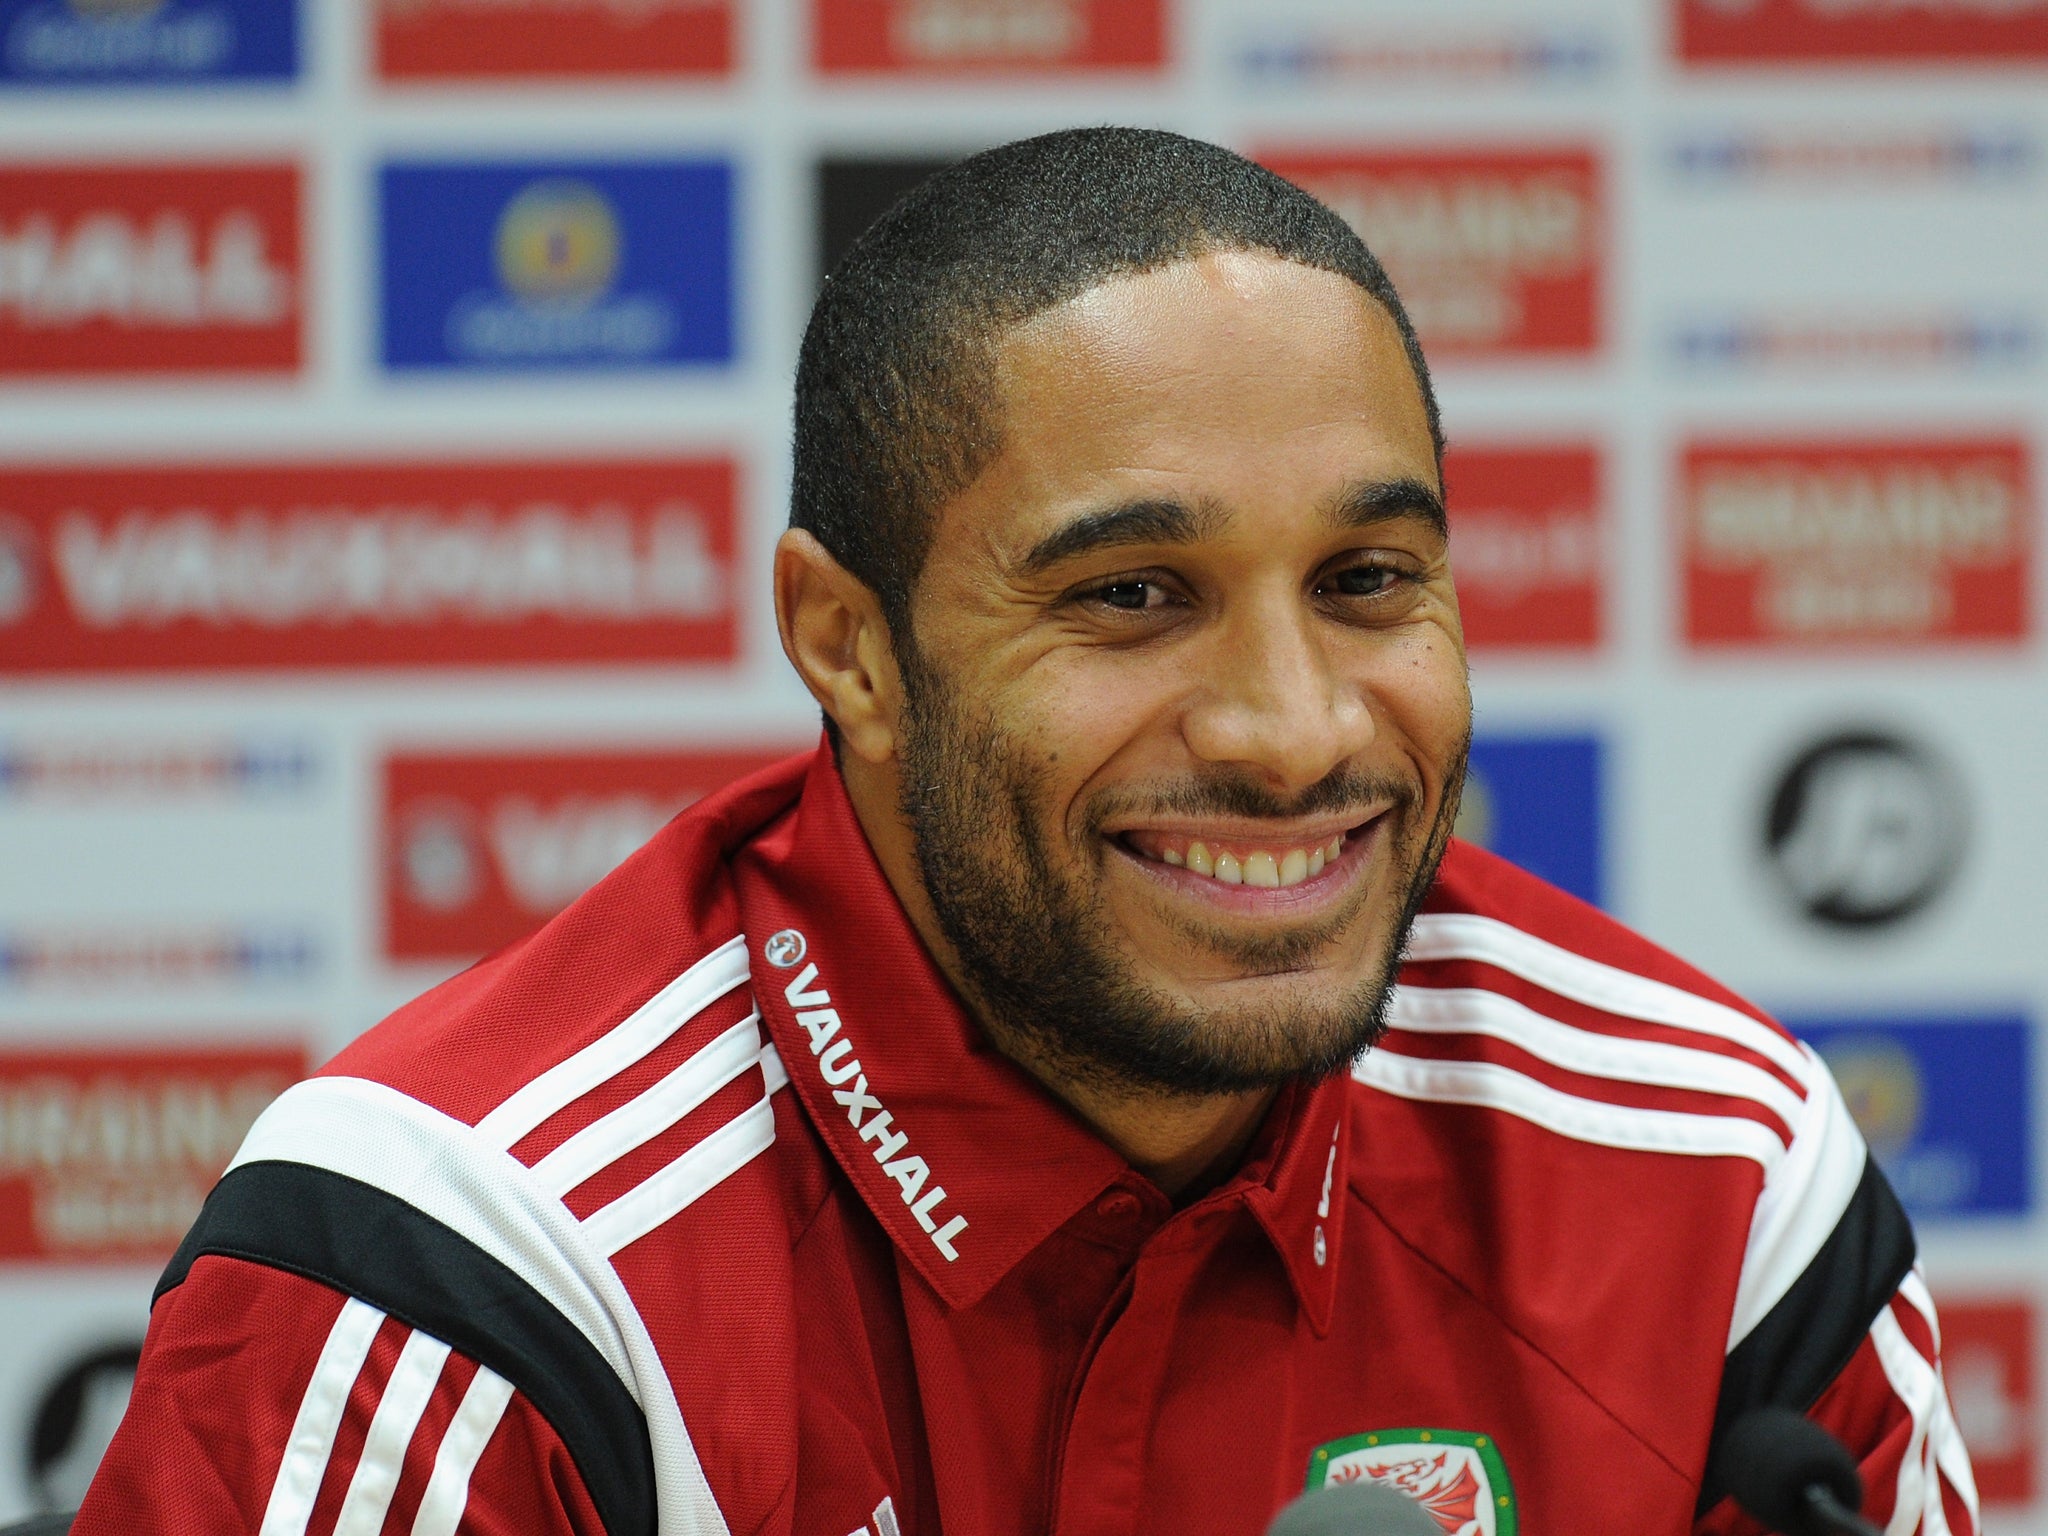 Wales captain Ashley Williams has urged fans to get behind manager Chris Coleman following his two-year contract extension